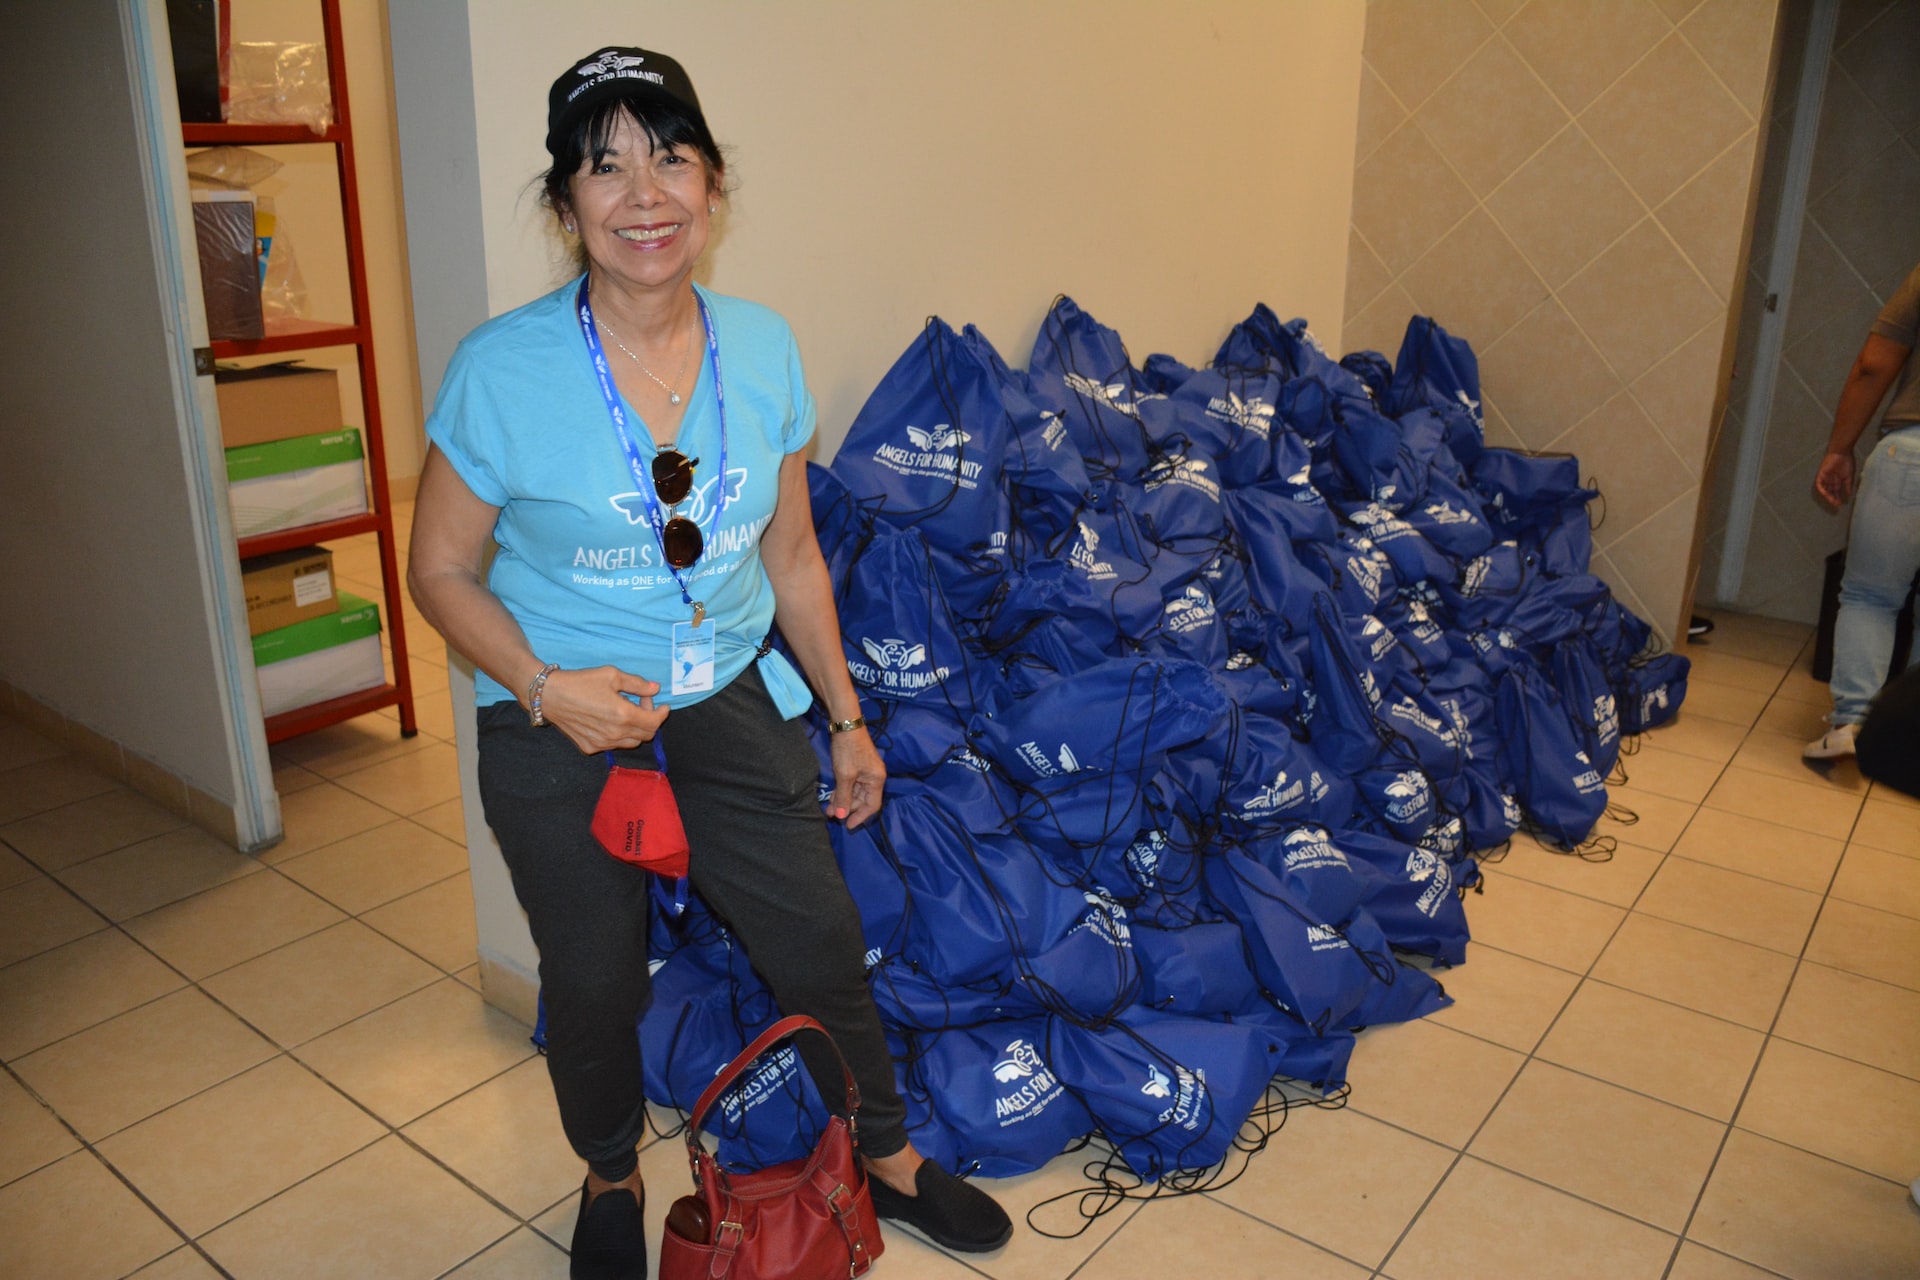 Smiling volunteer sitting near a large pile of donations.